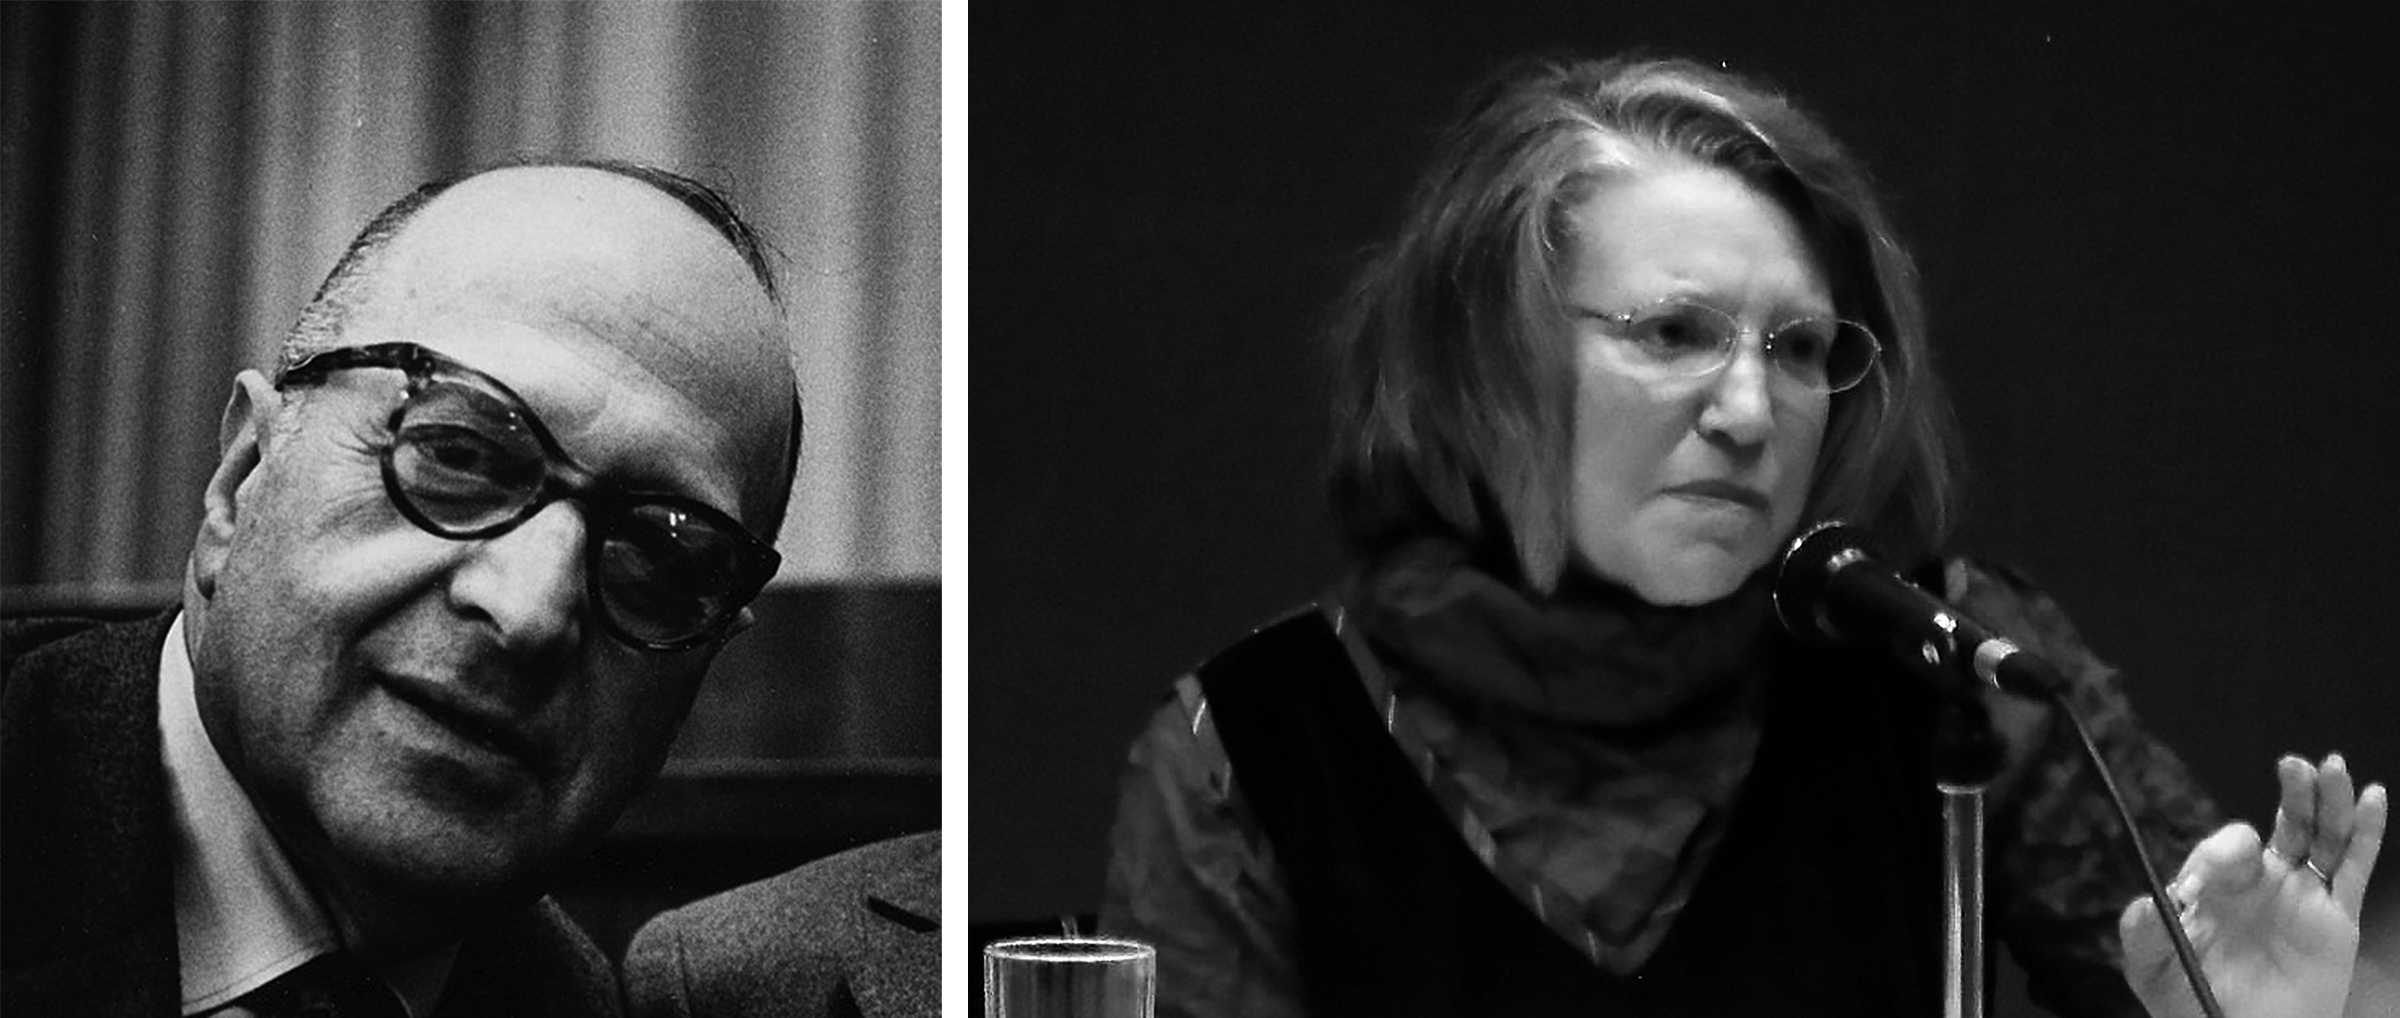 From left to right: photo of Max Horkheimer; photo of Nancy Fraser speaking into a microphone.